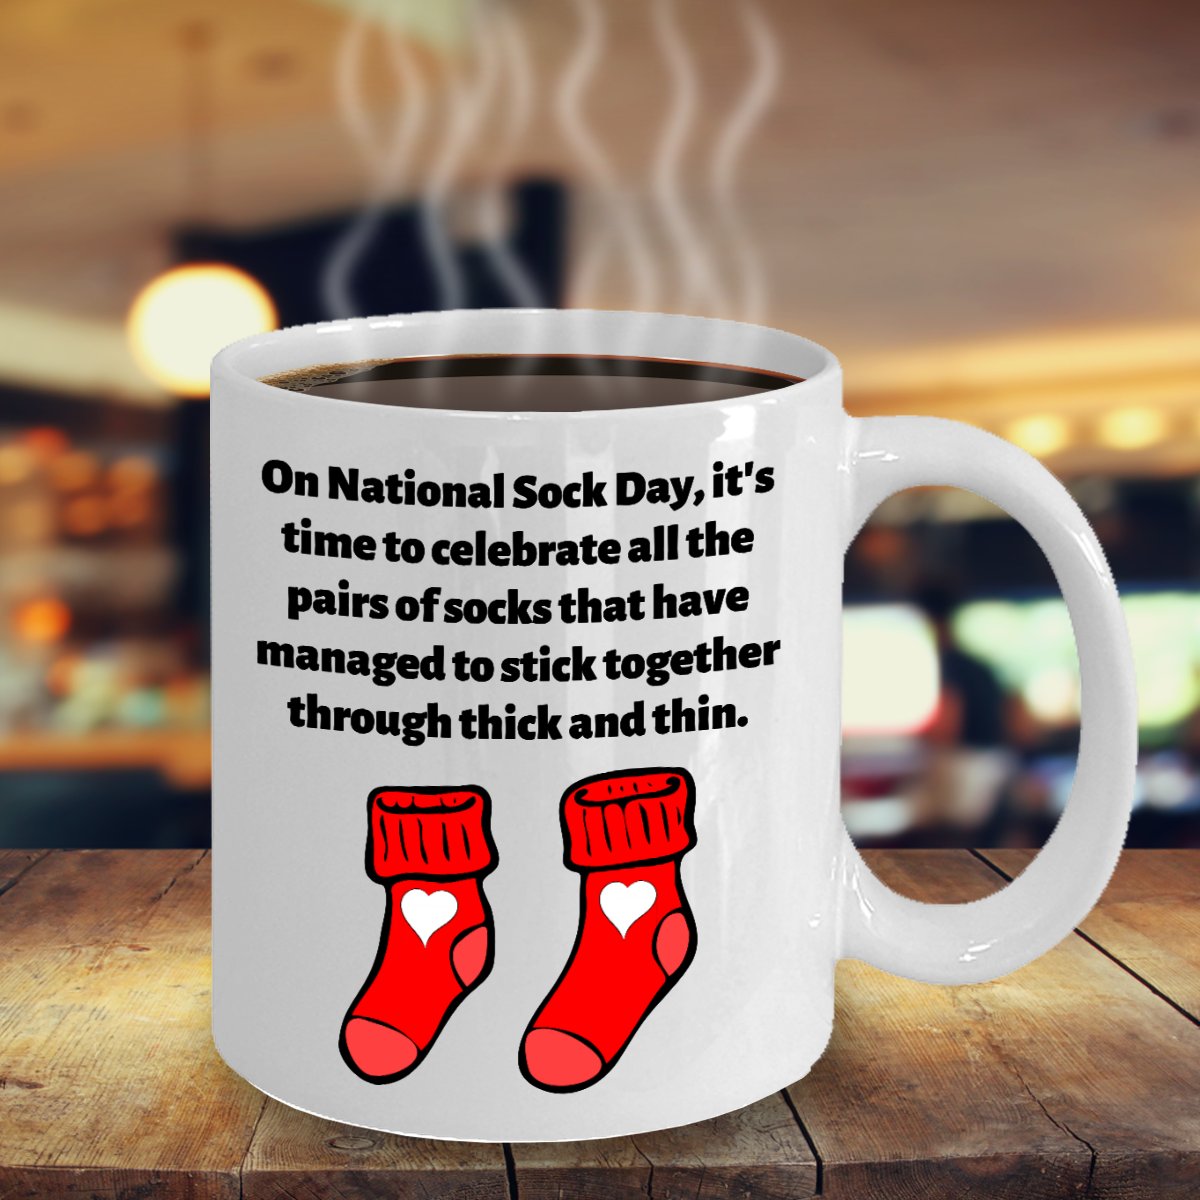 National Sock Day